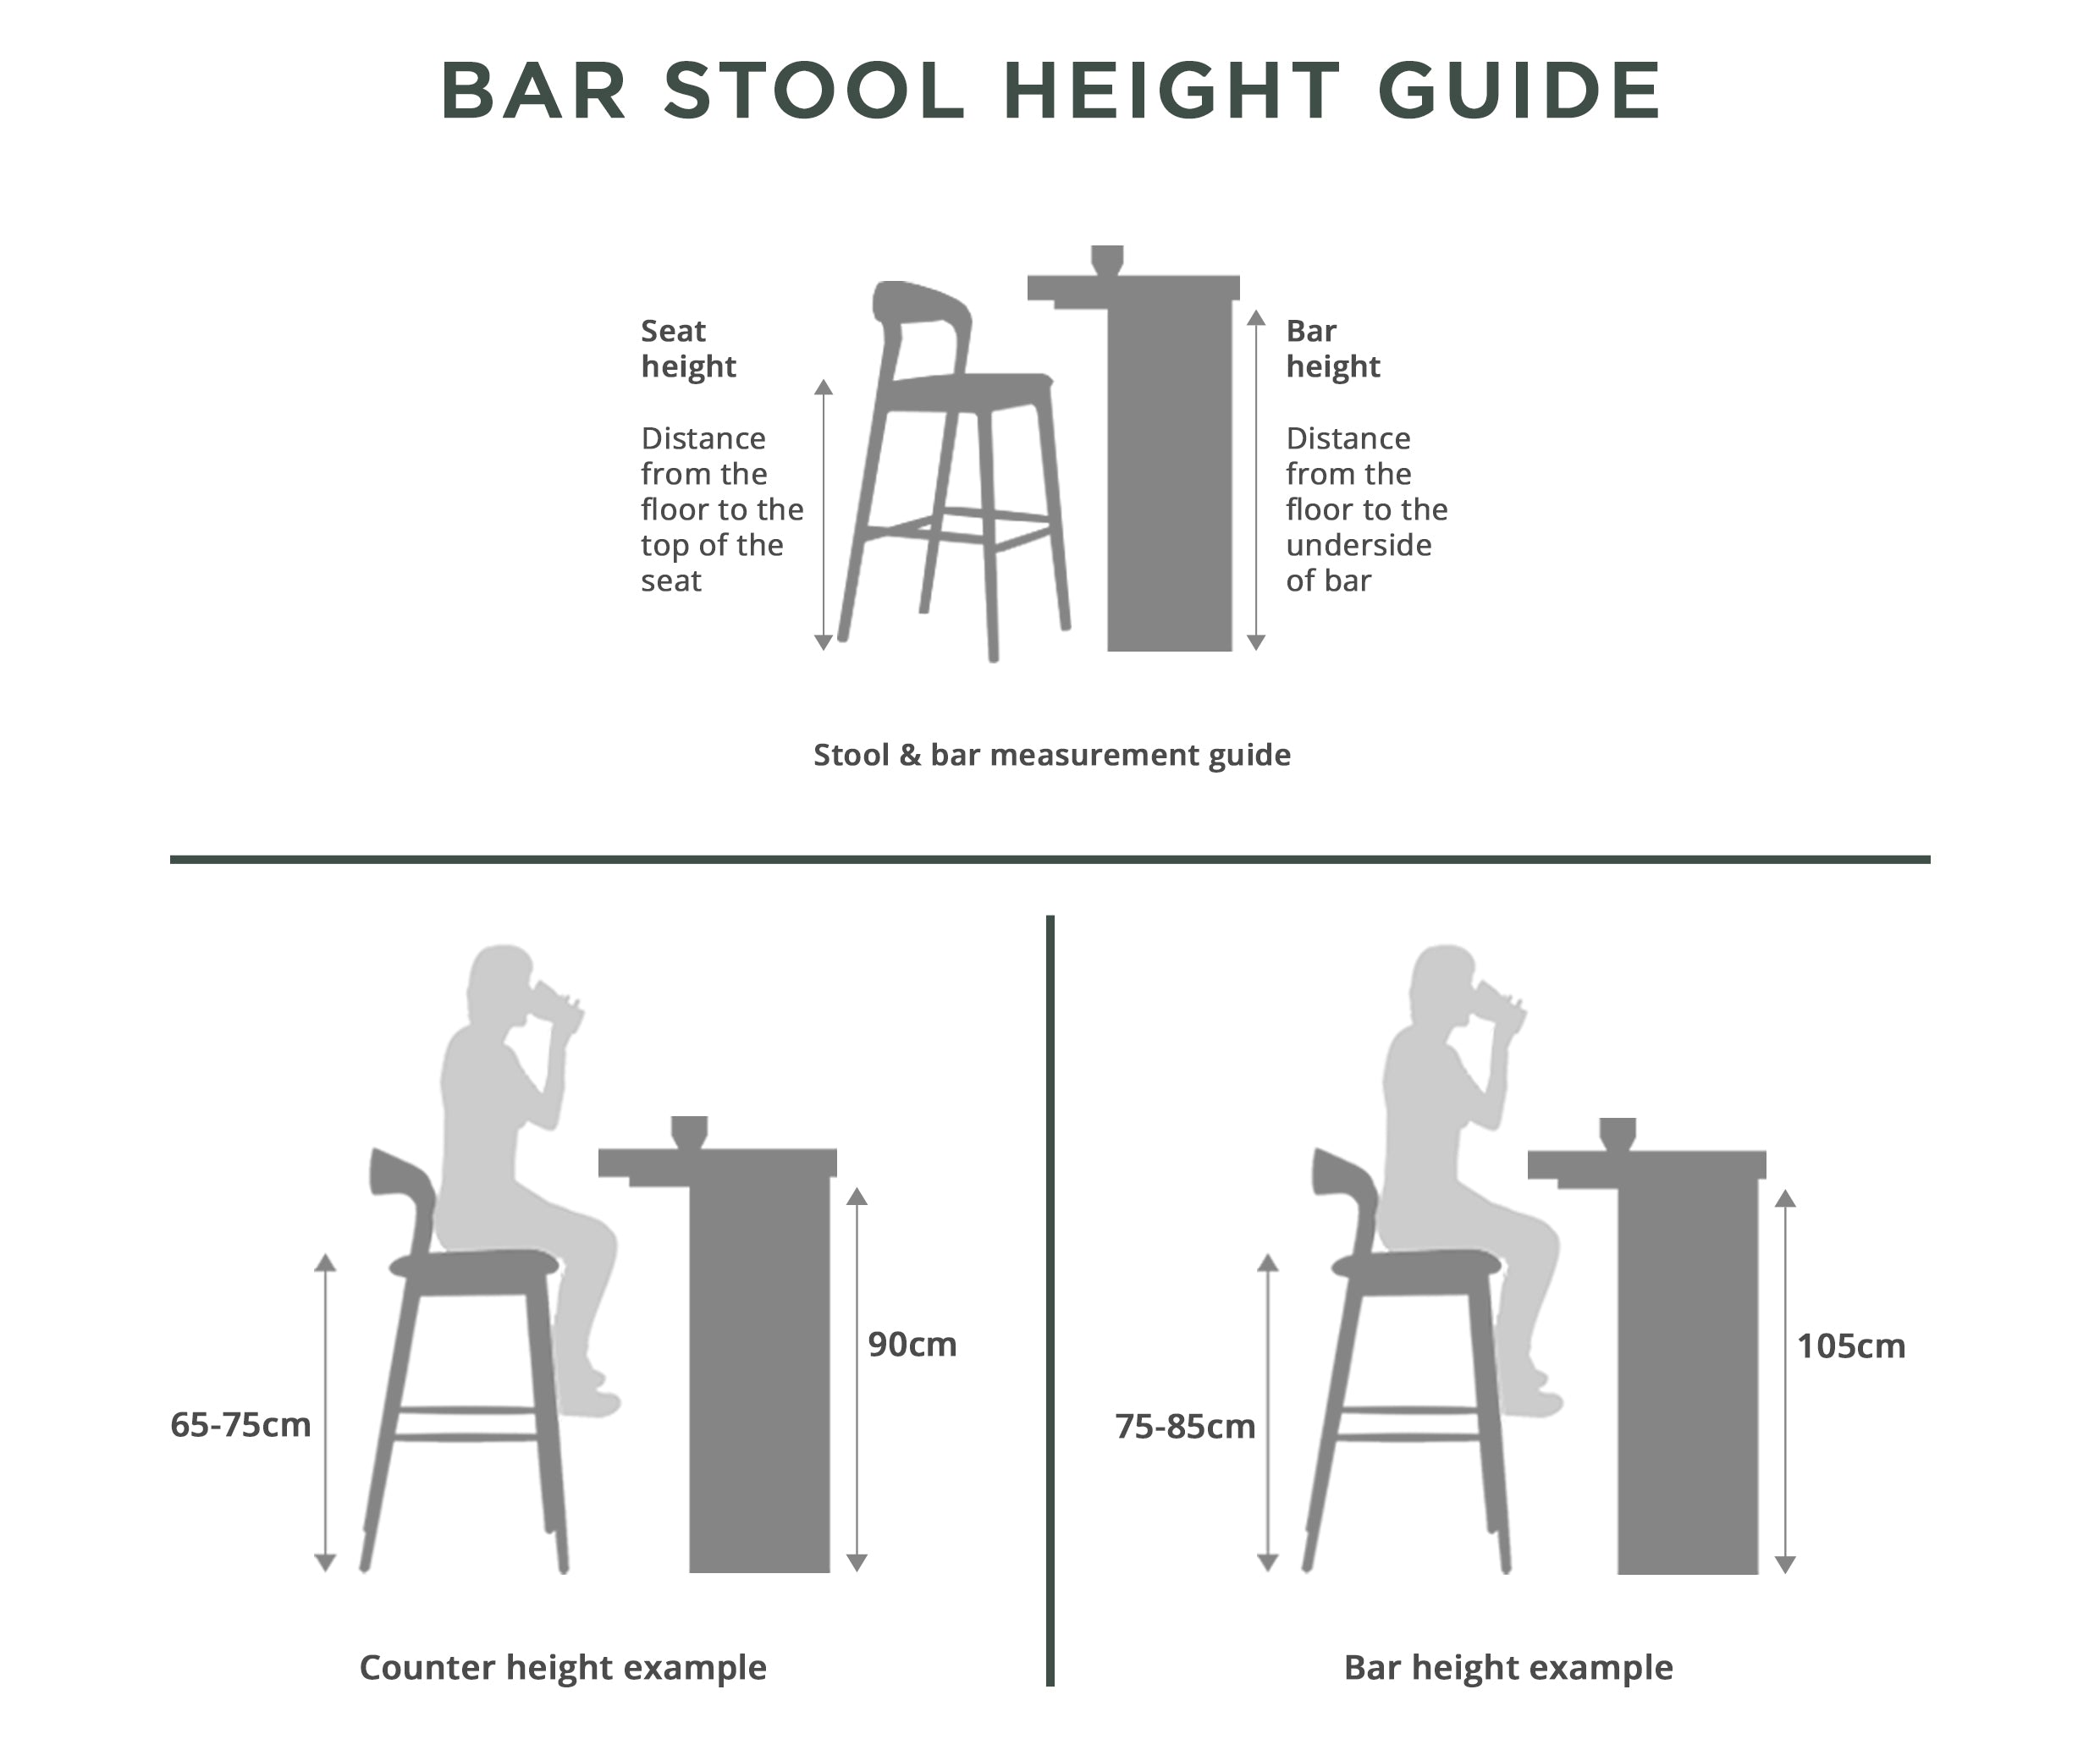 Bar Stool Size Guide - What Height and width Should my bar stool